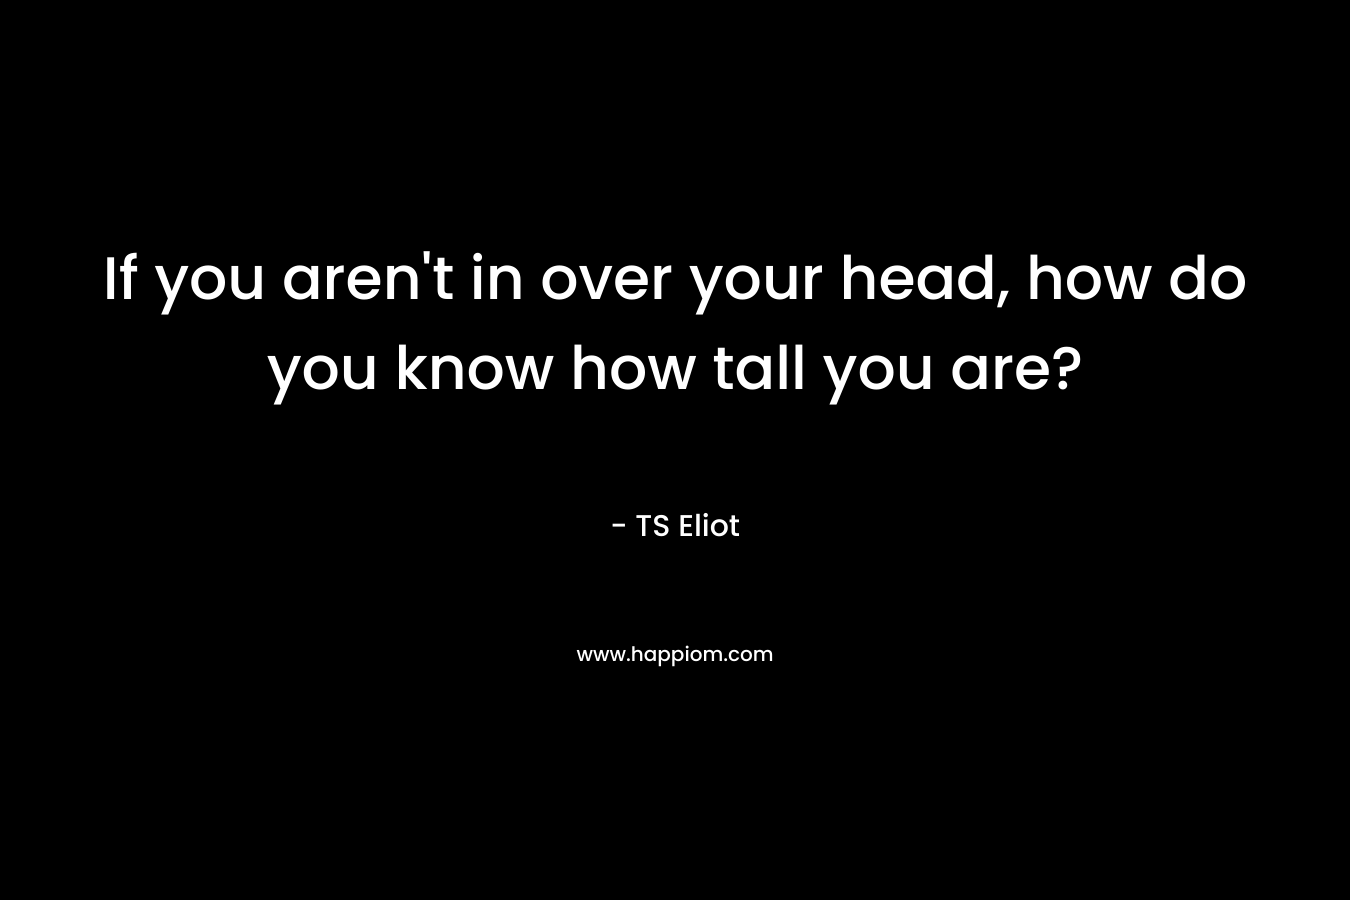 If you aren’t in over your head, how do you know how tall you are? – TS Eliot